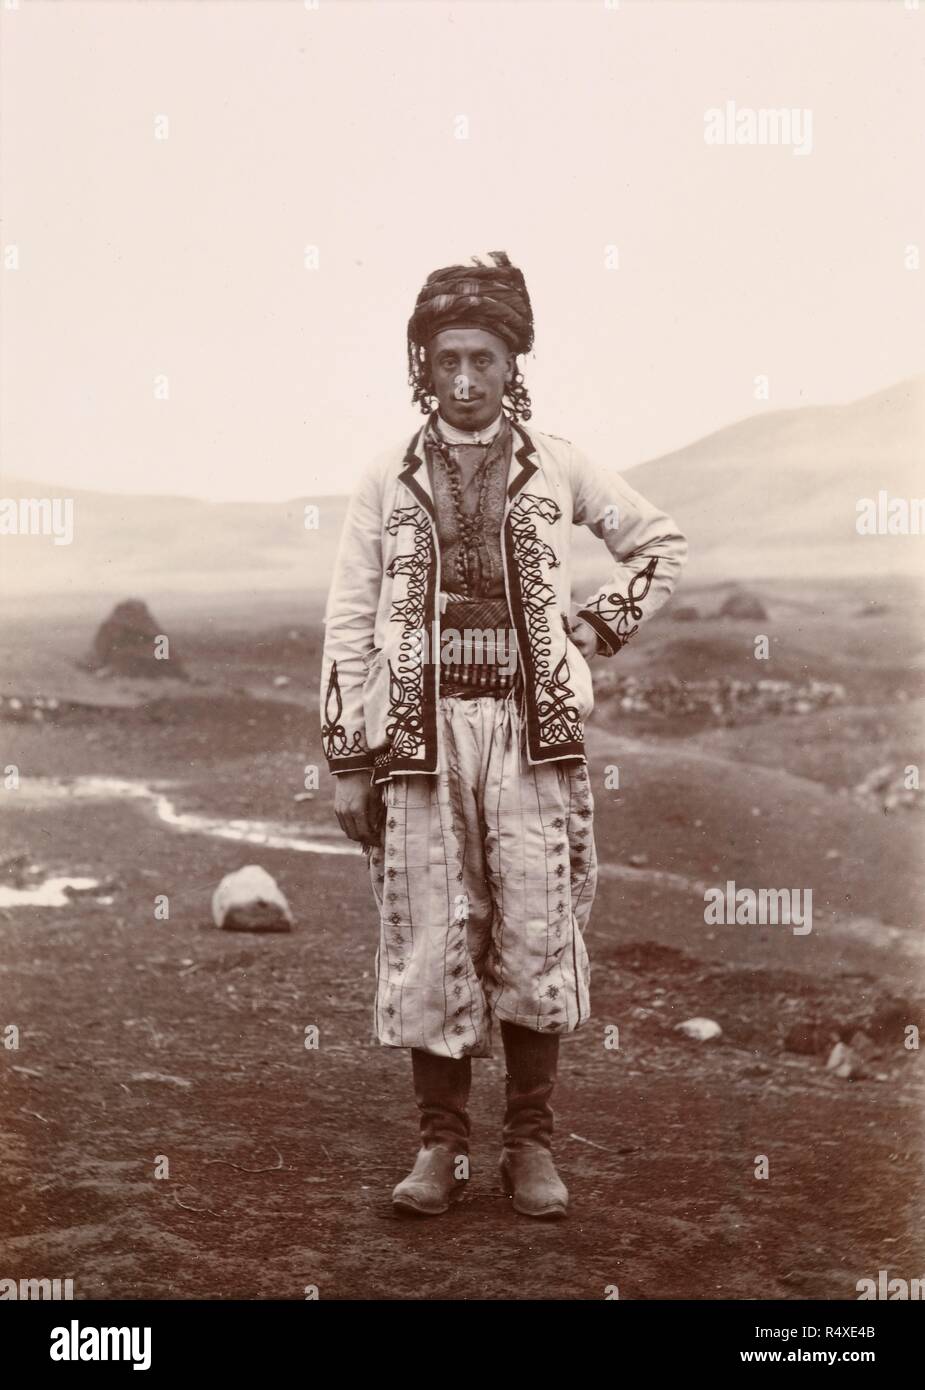 A Kurd in gala dress at village of KÃ¶shk (Sipkanli Kurds). The outskirts of his subterranean village in the background, Autumn 1893. Photographer: Henry Finnis Blosse Lynch, . Source: Photo 430/7 14. Stock Photo